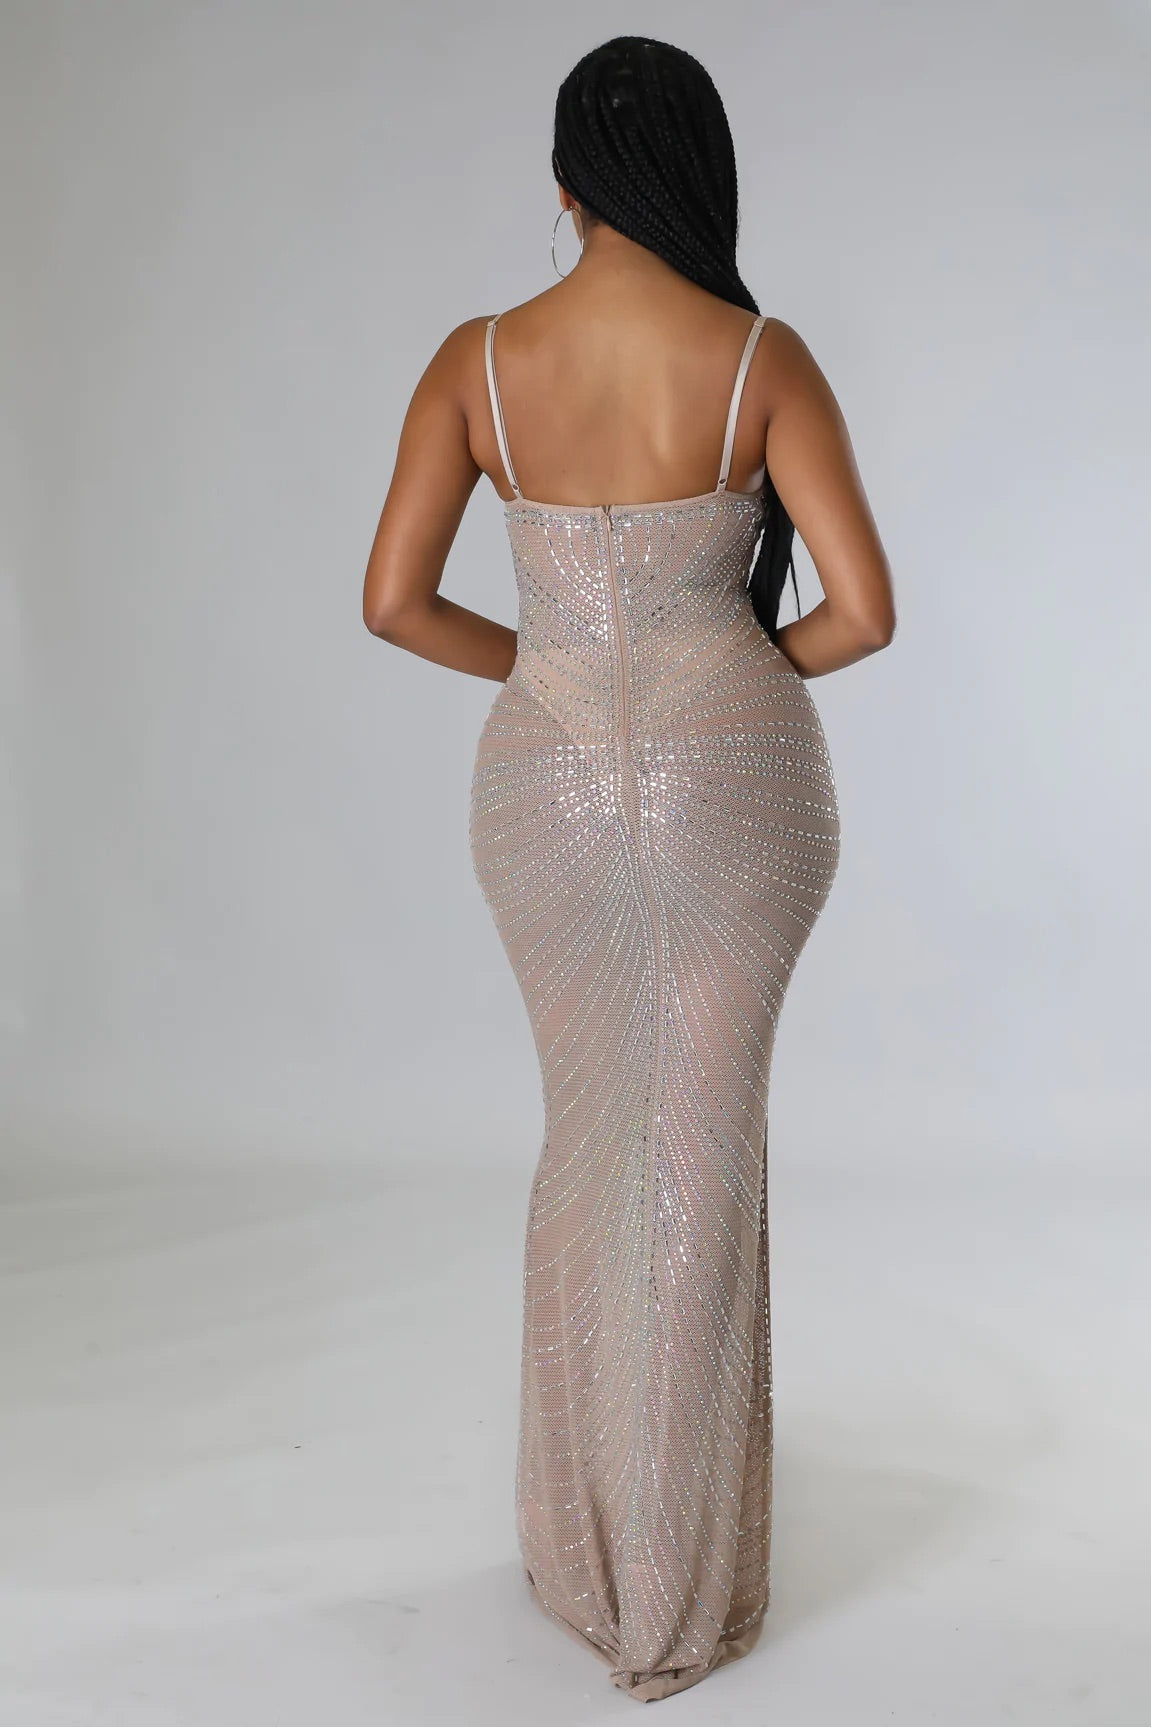 Perfectly Charming Nude Gown